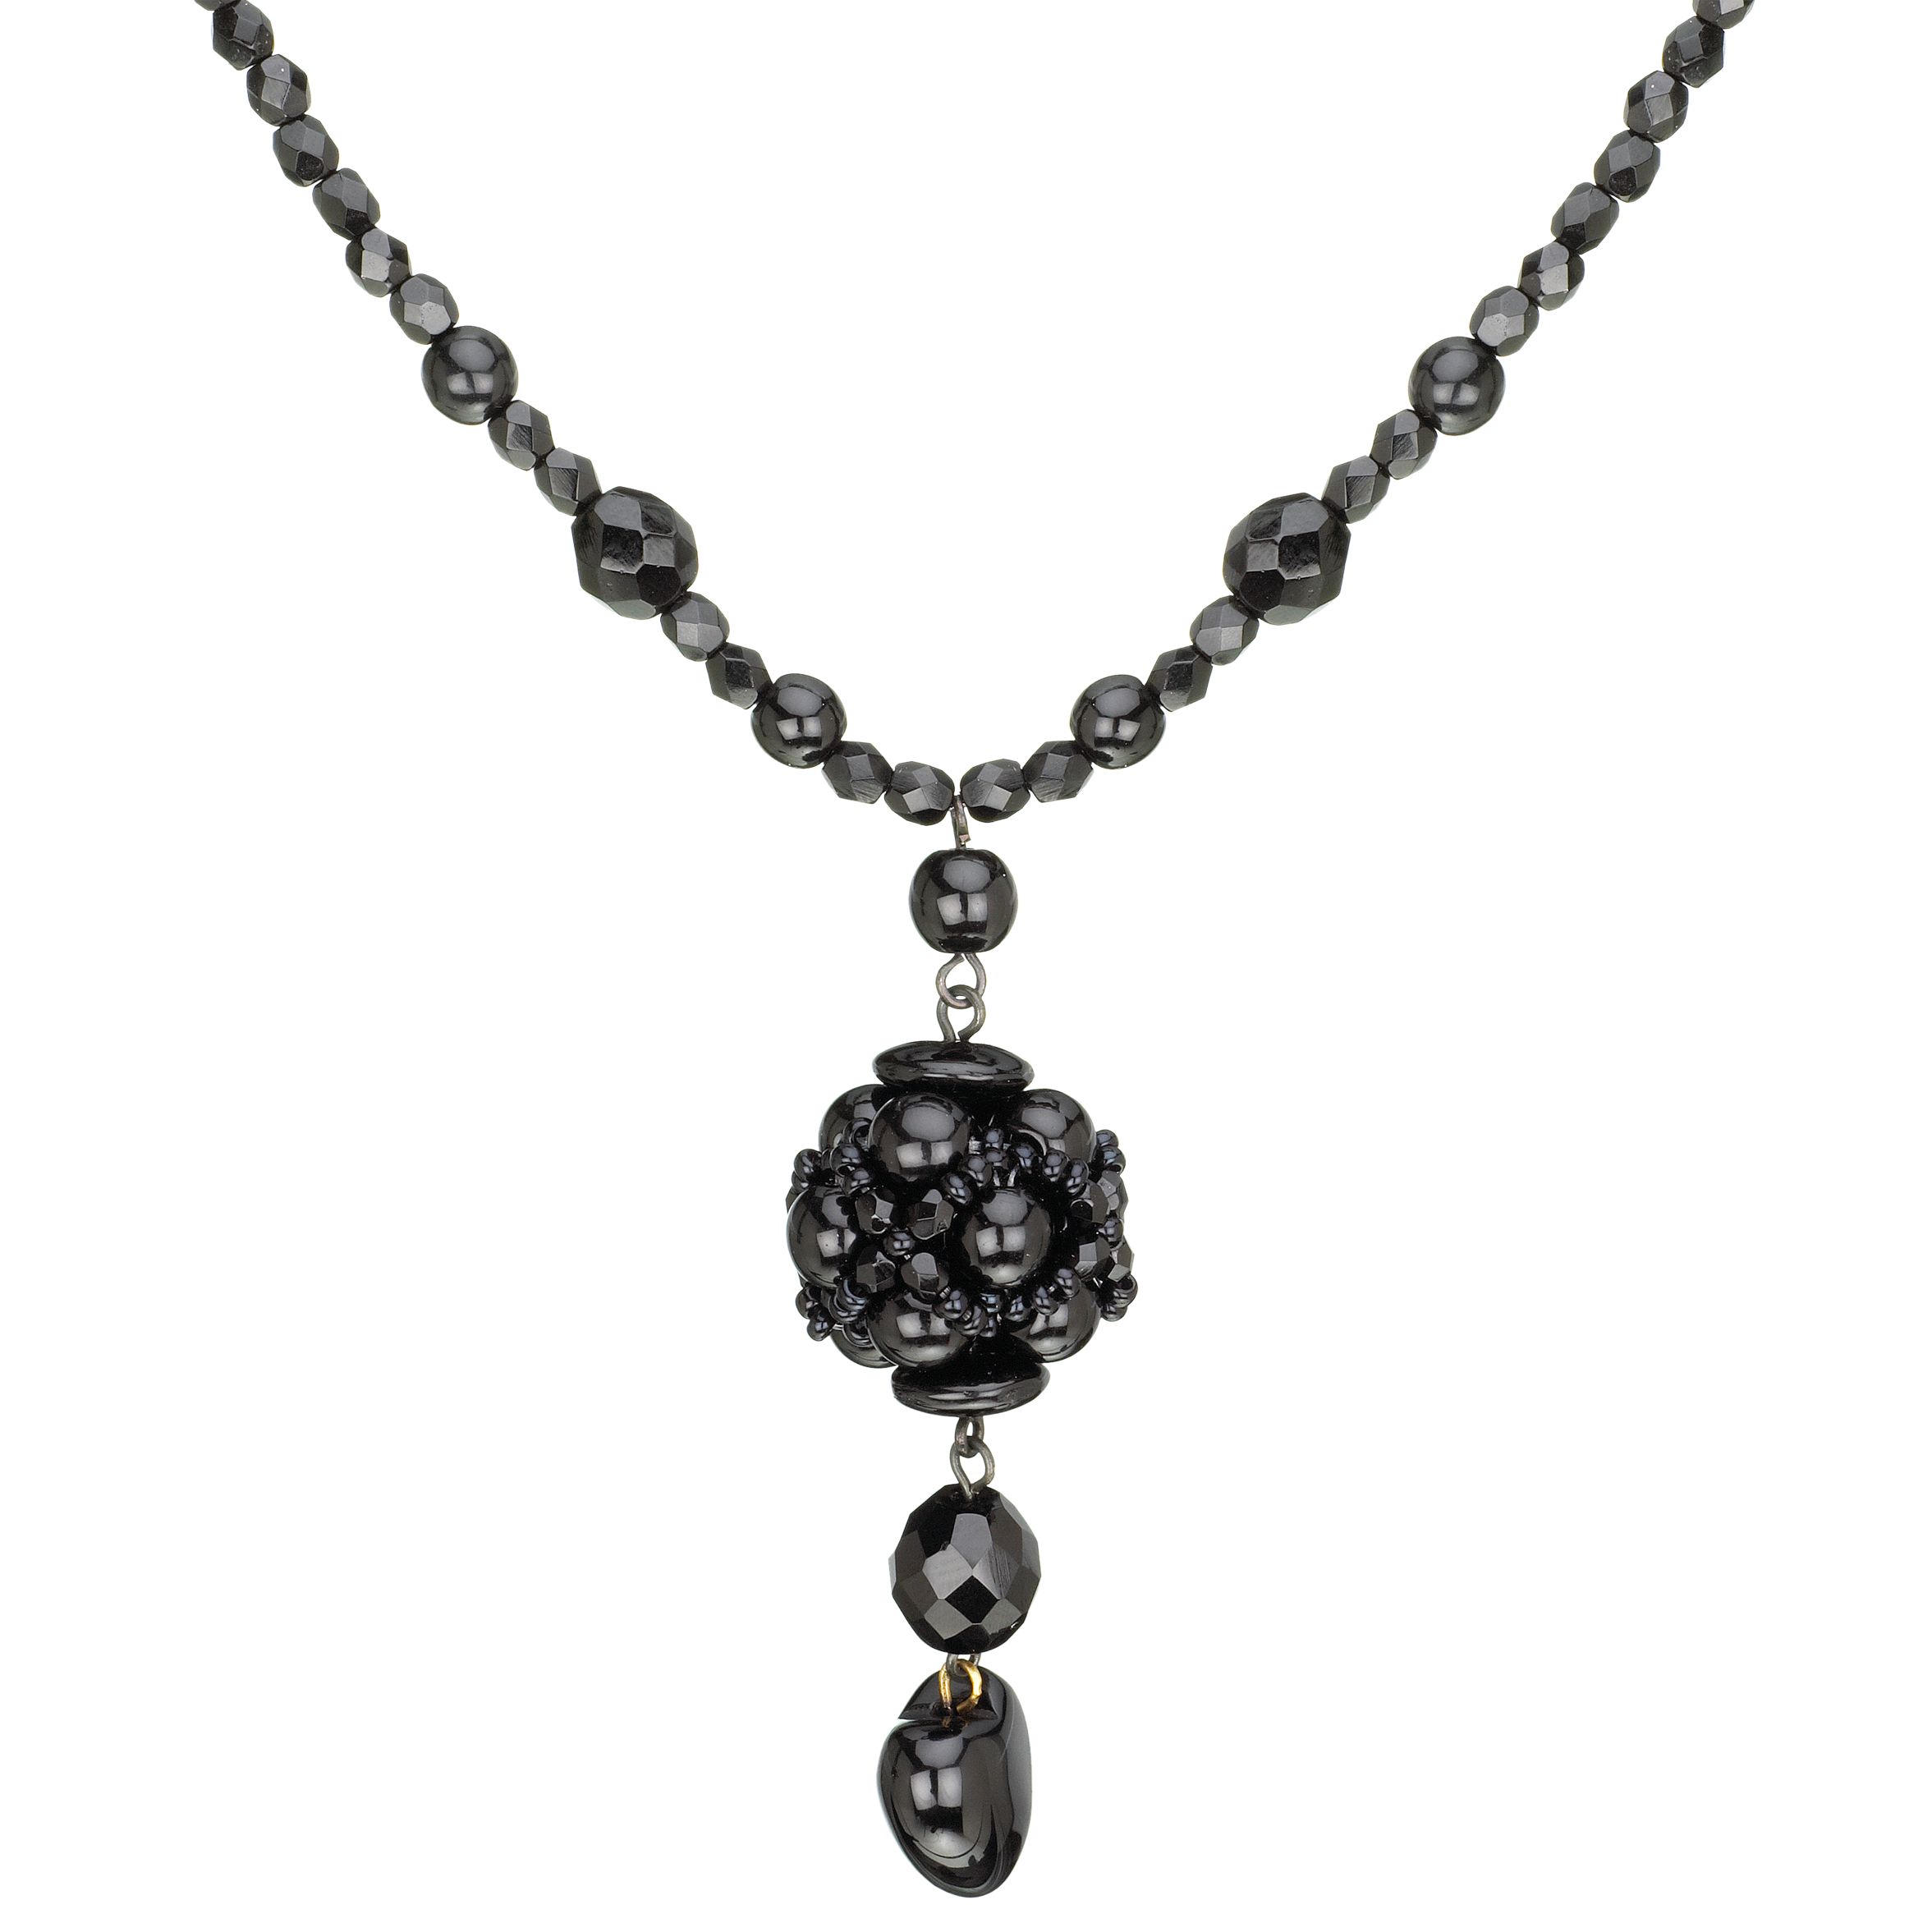 MJ1305 Bohemian Glass and Onyx Drop Necklace